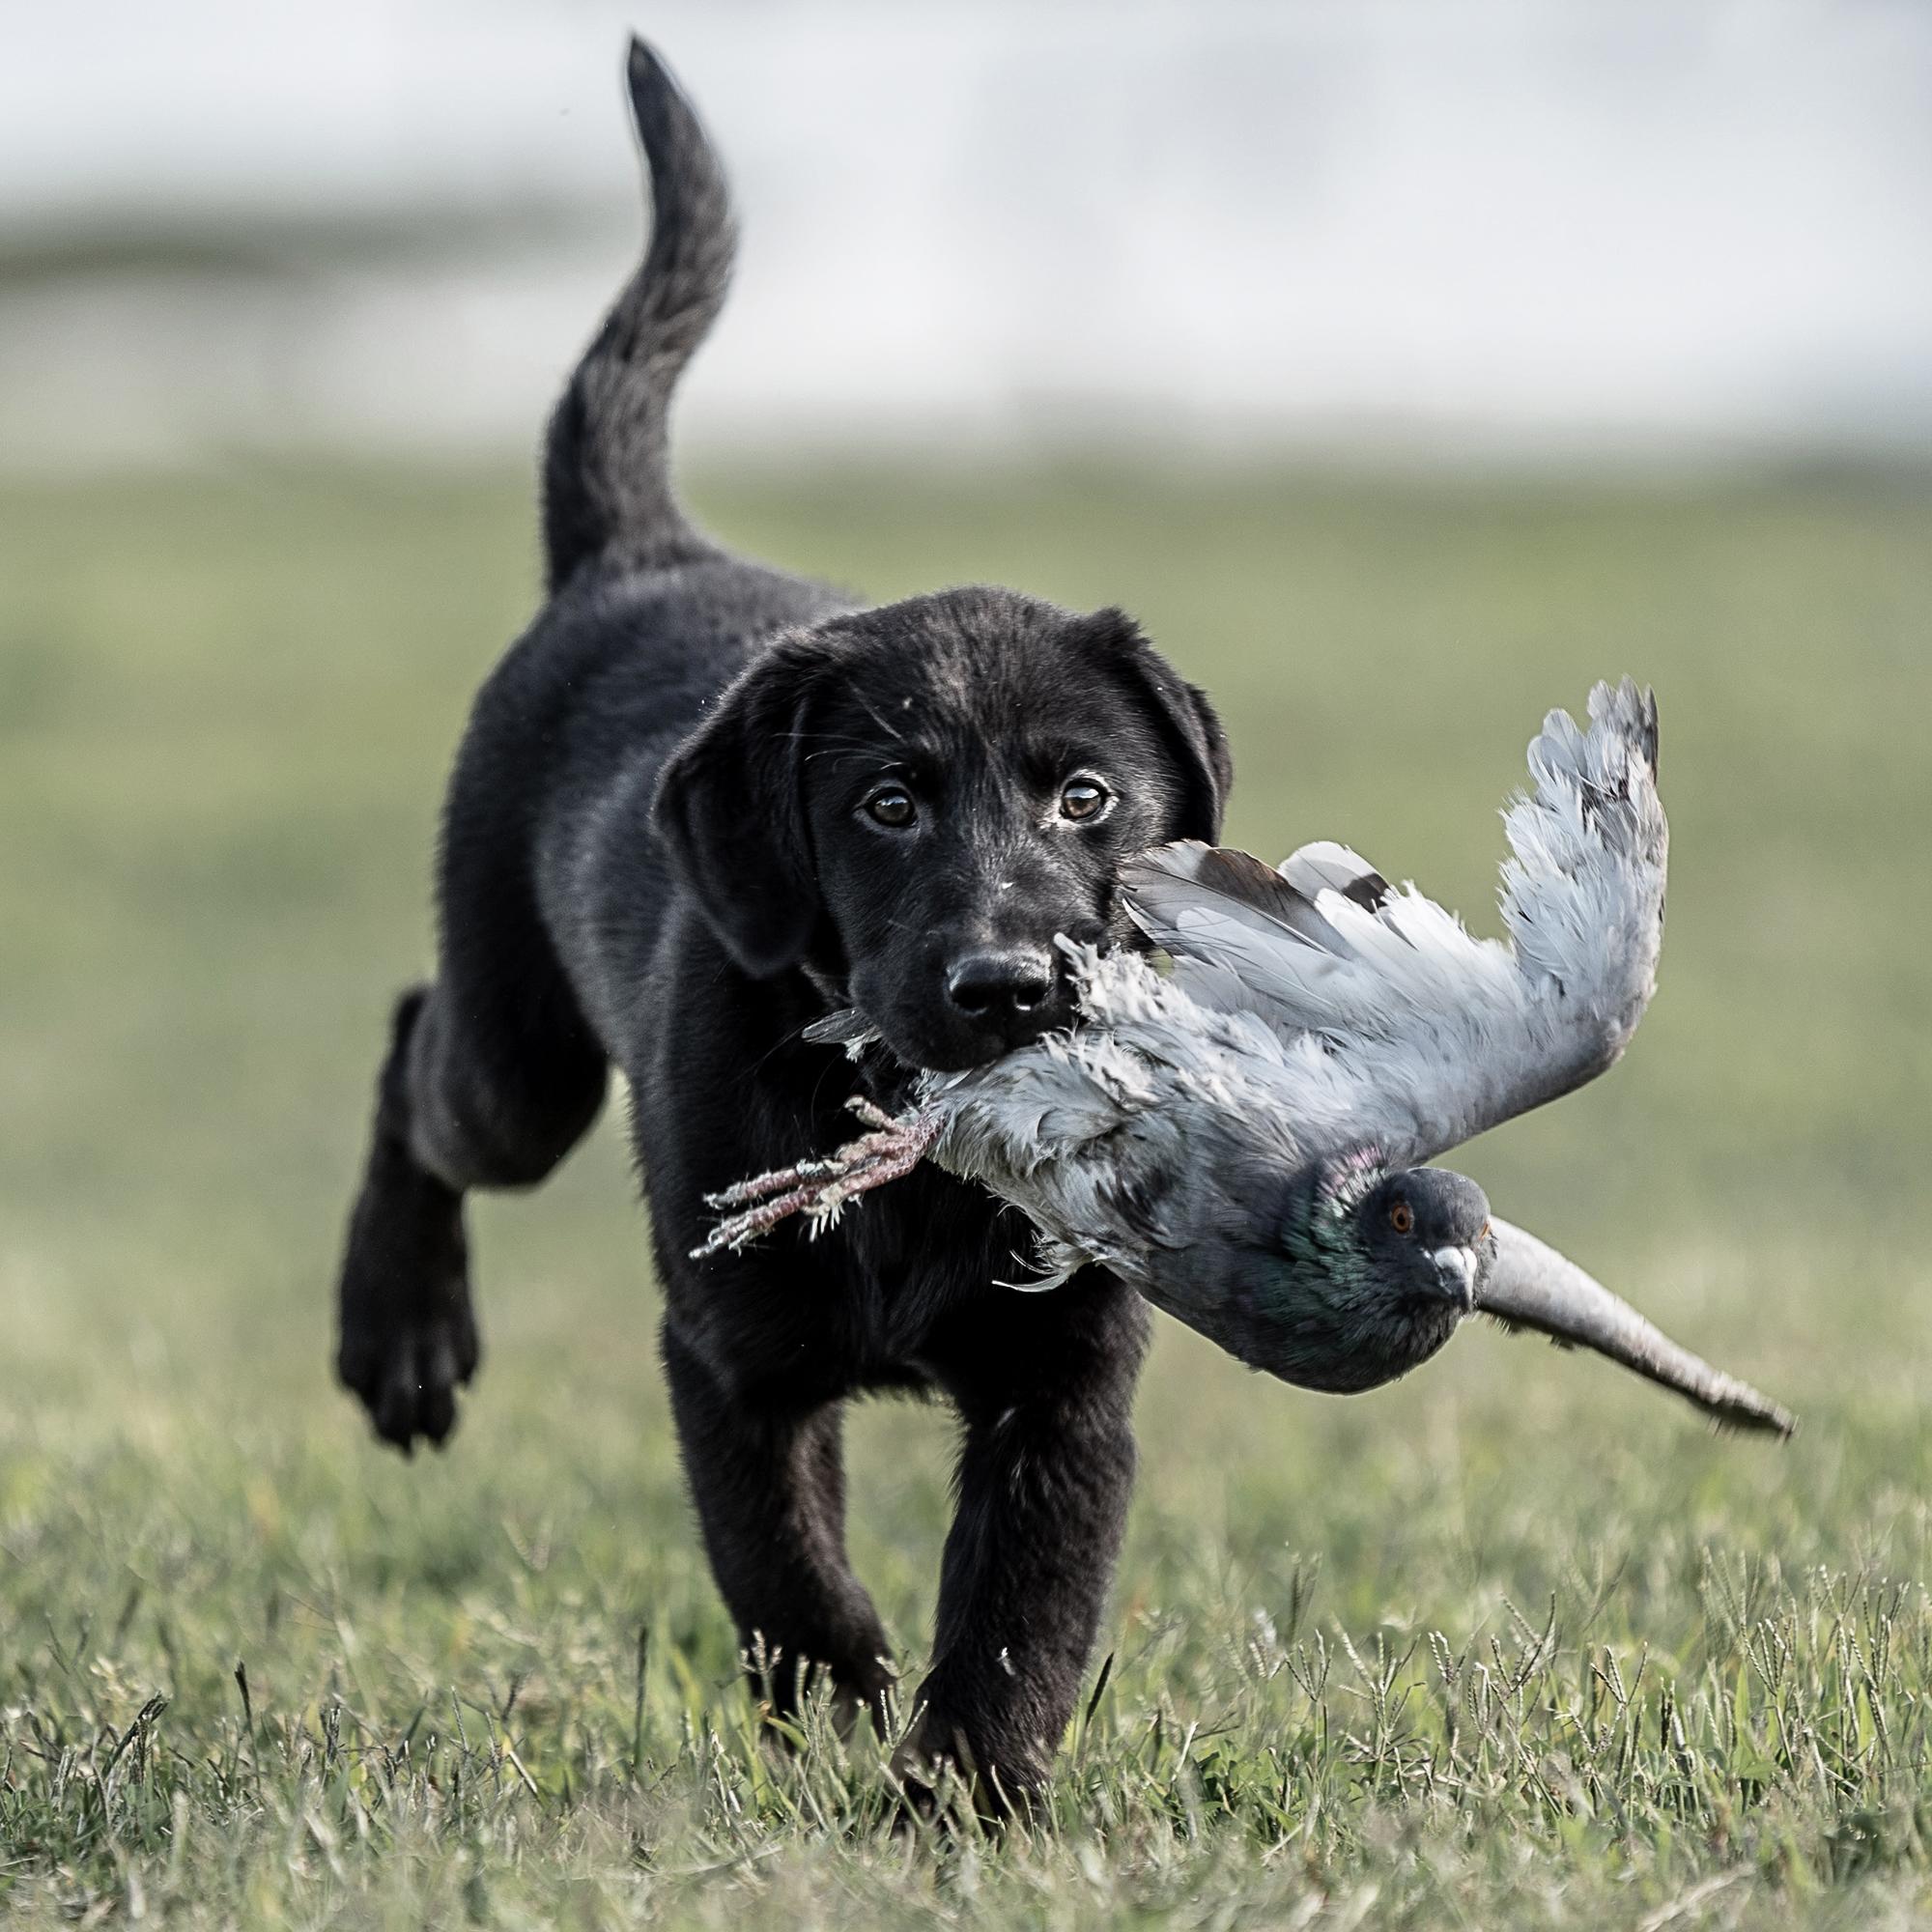 Black lab puppy with live pigeon in mouth